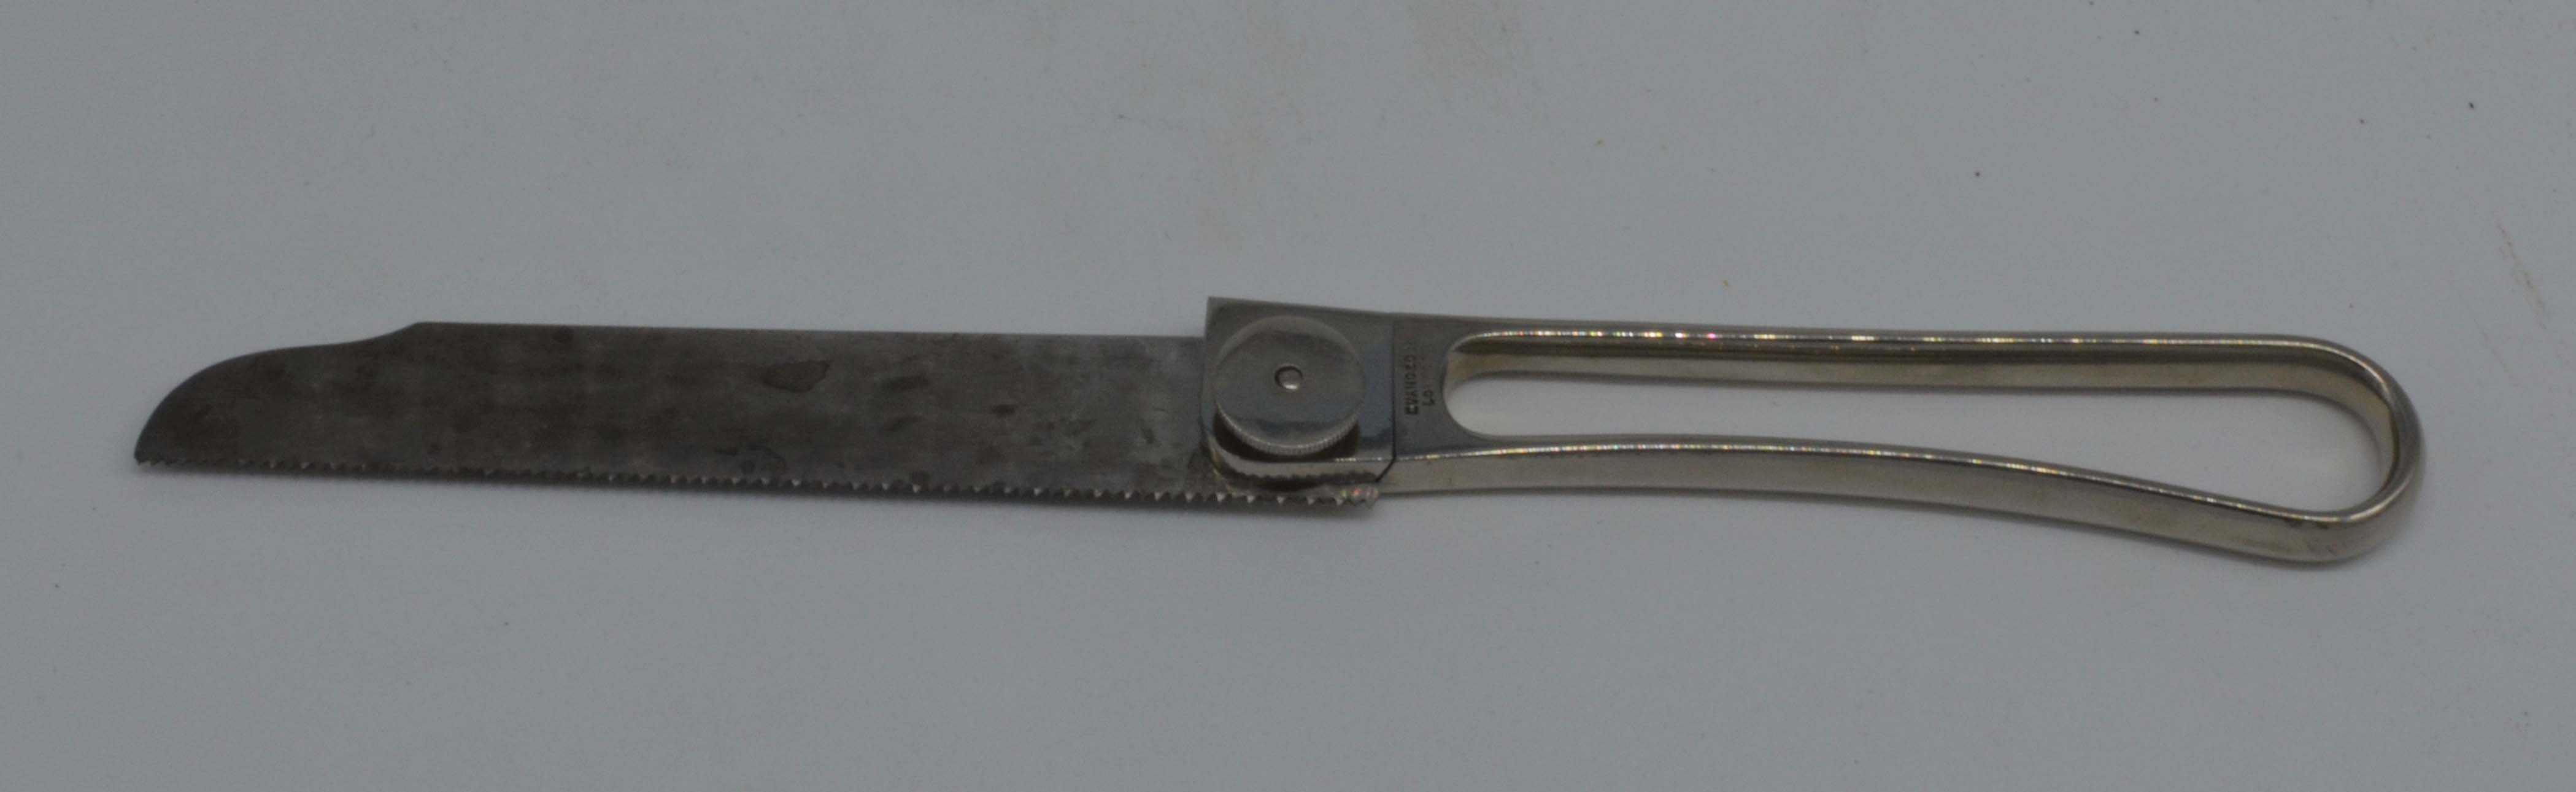 surgical%20saw